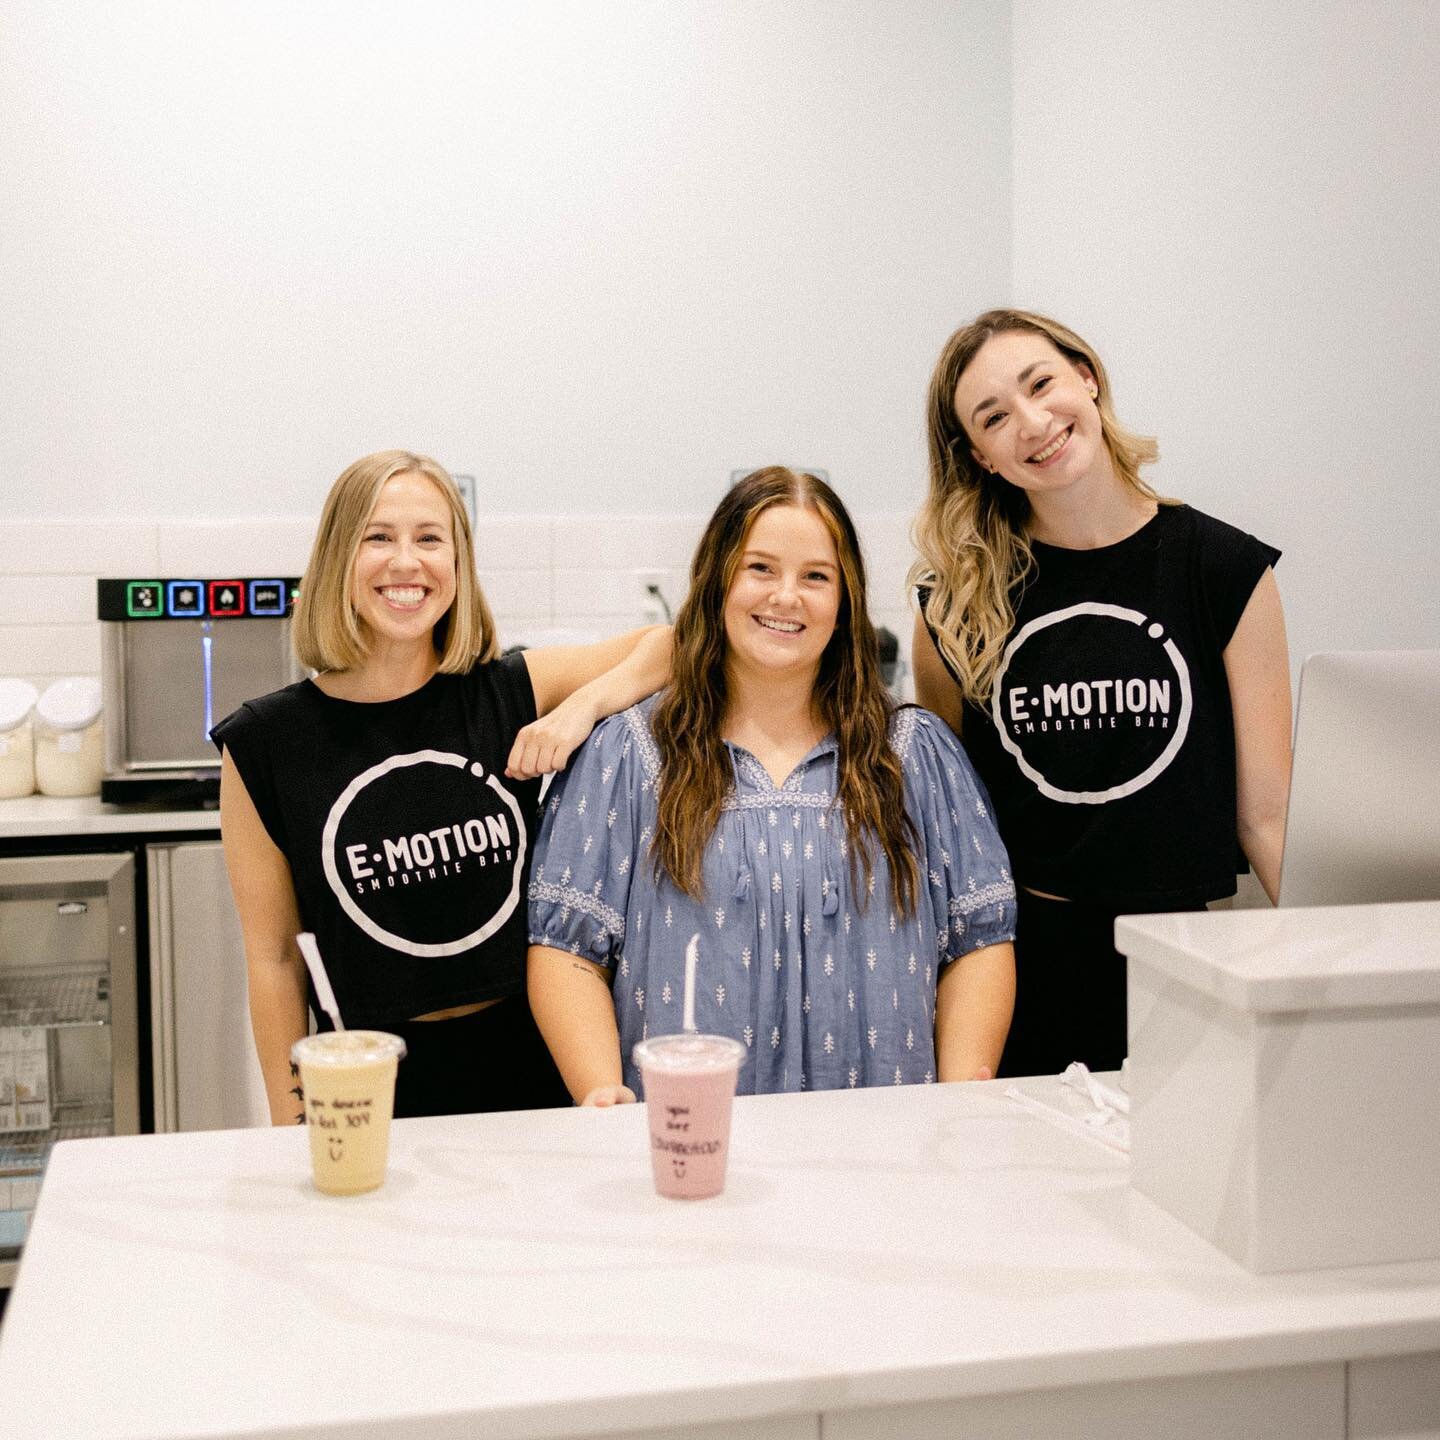 A HUGE shoutout to our amazing E&bull;motion Smoothie Bar staff!!! 

We are so excited to now offer you the opportunity to enjoy a healthy and refreshing smoothie after each E&bull;motion class! Don&rsquo;t miss out on hydrating and replenishing your